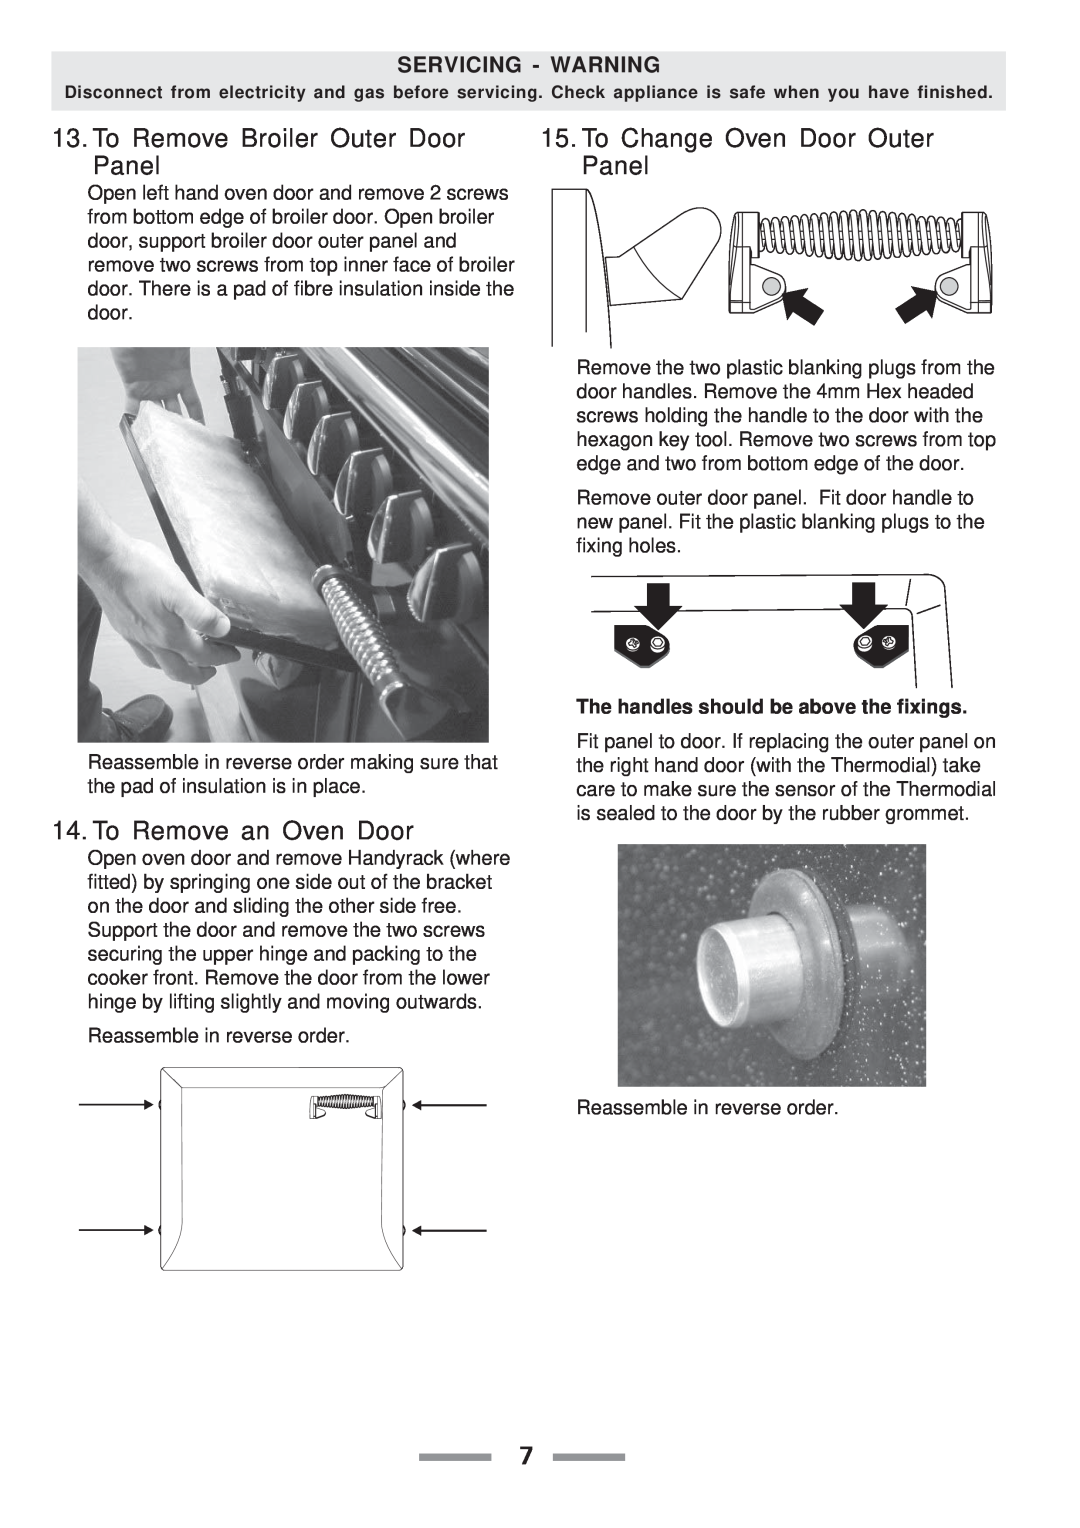 Aga Ranges F104010-01 manual To Remove Broiler Outer Door Panel, To Remove an Oven Door, To Change Oven Door Outer Panel 